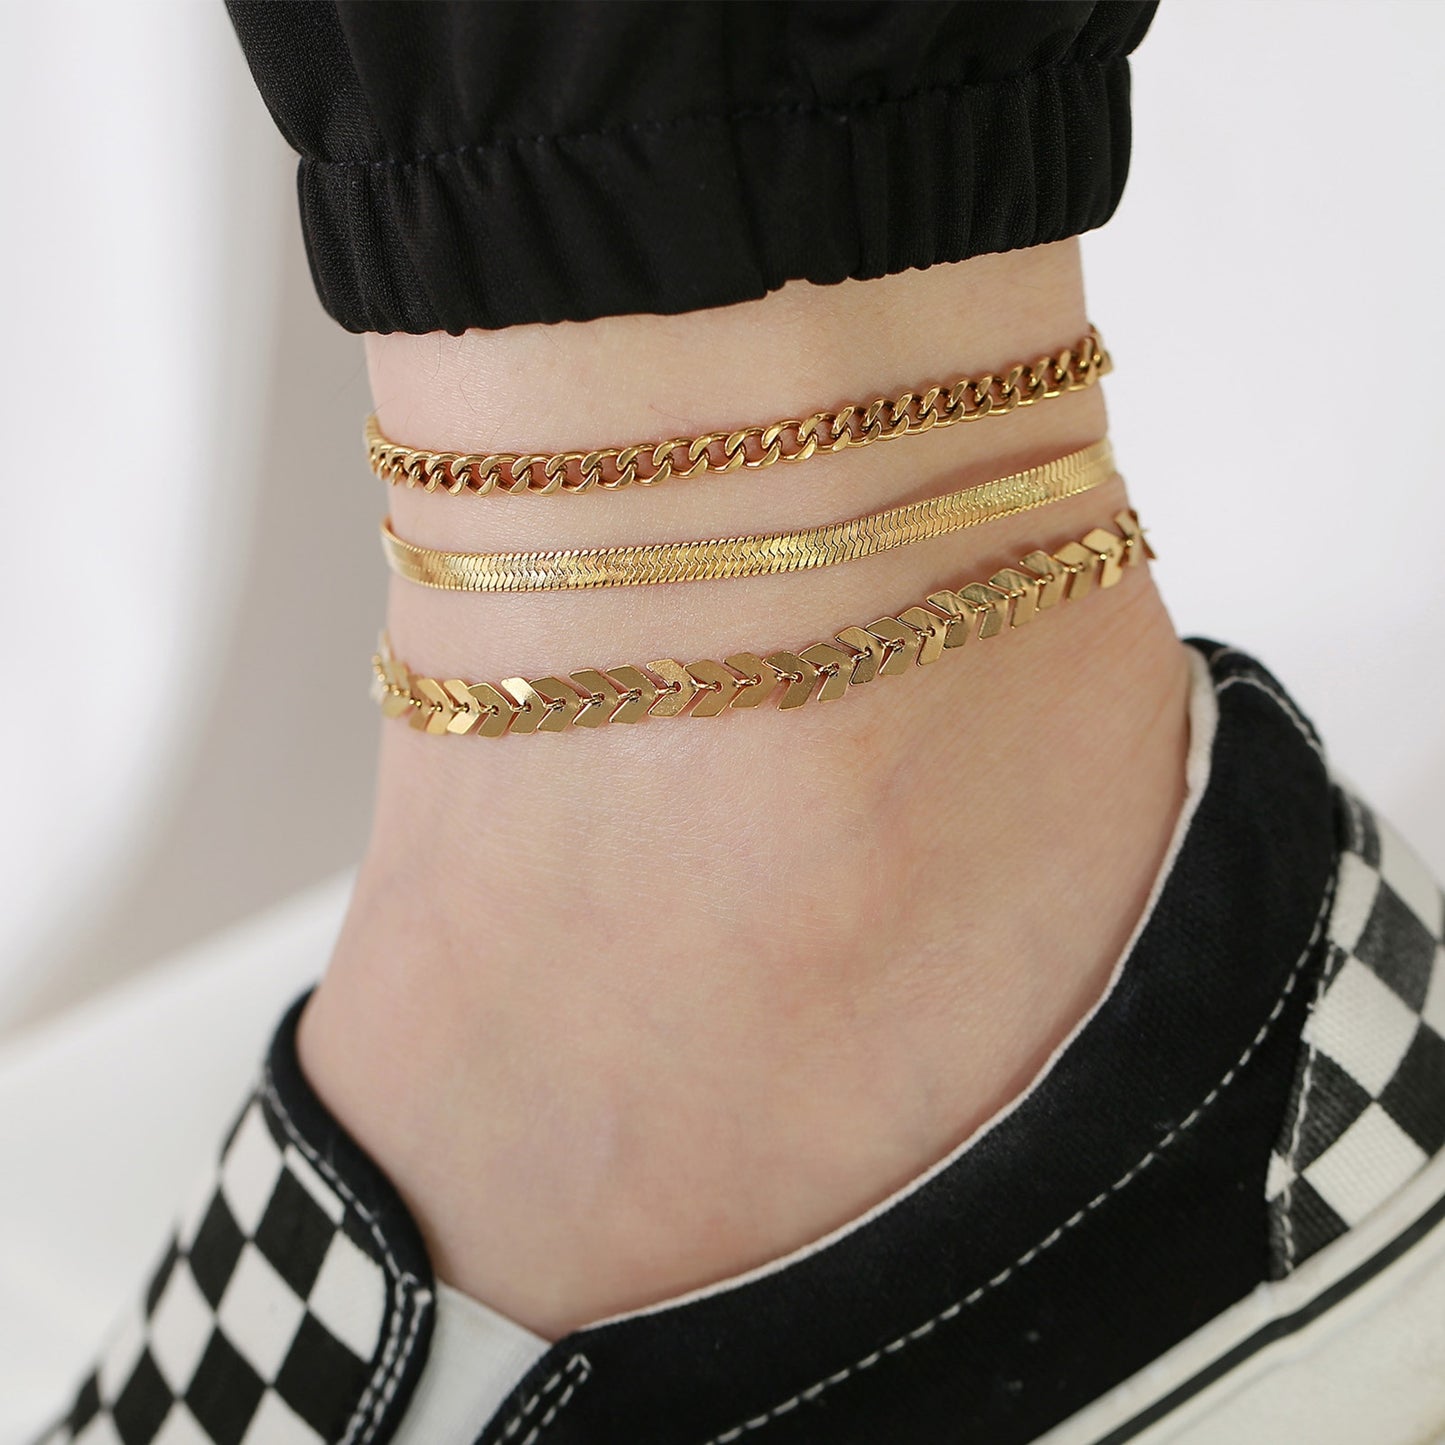 Multi styled Anklets